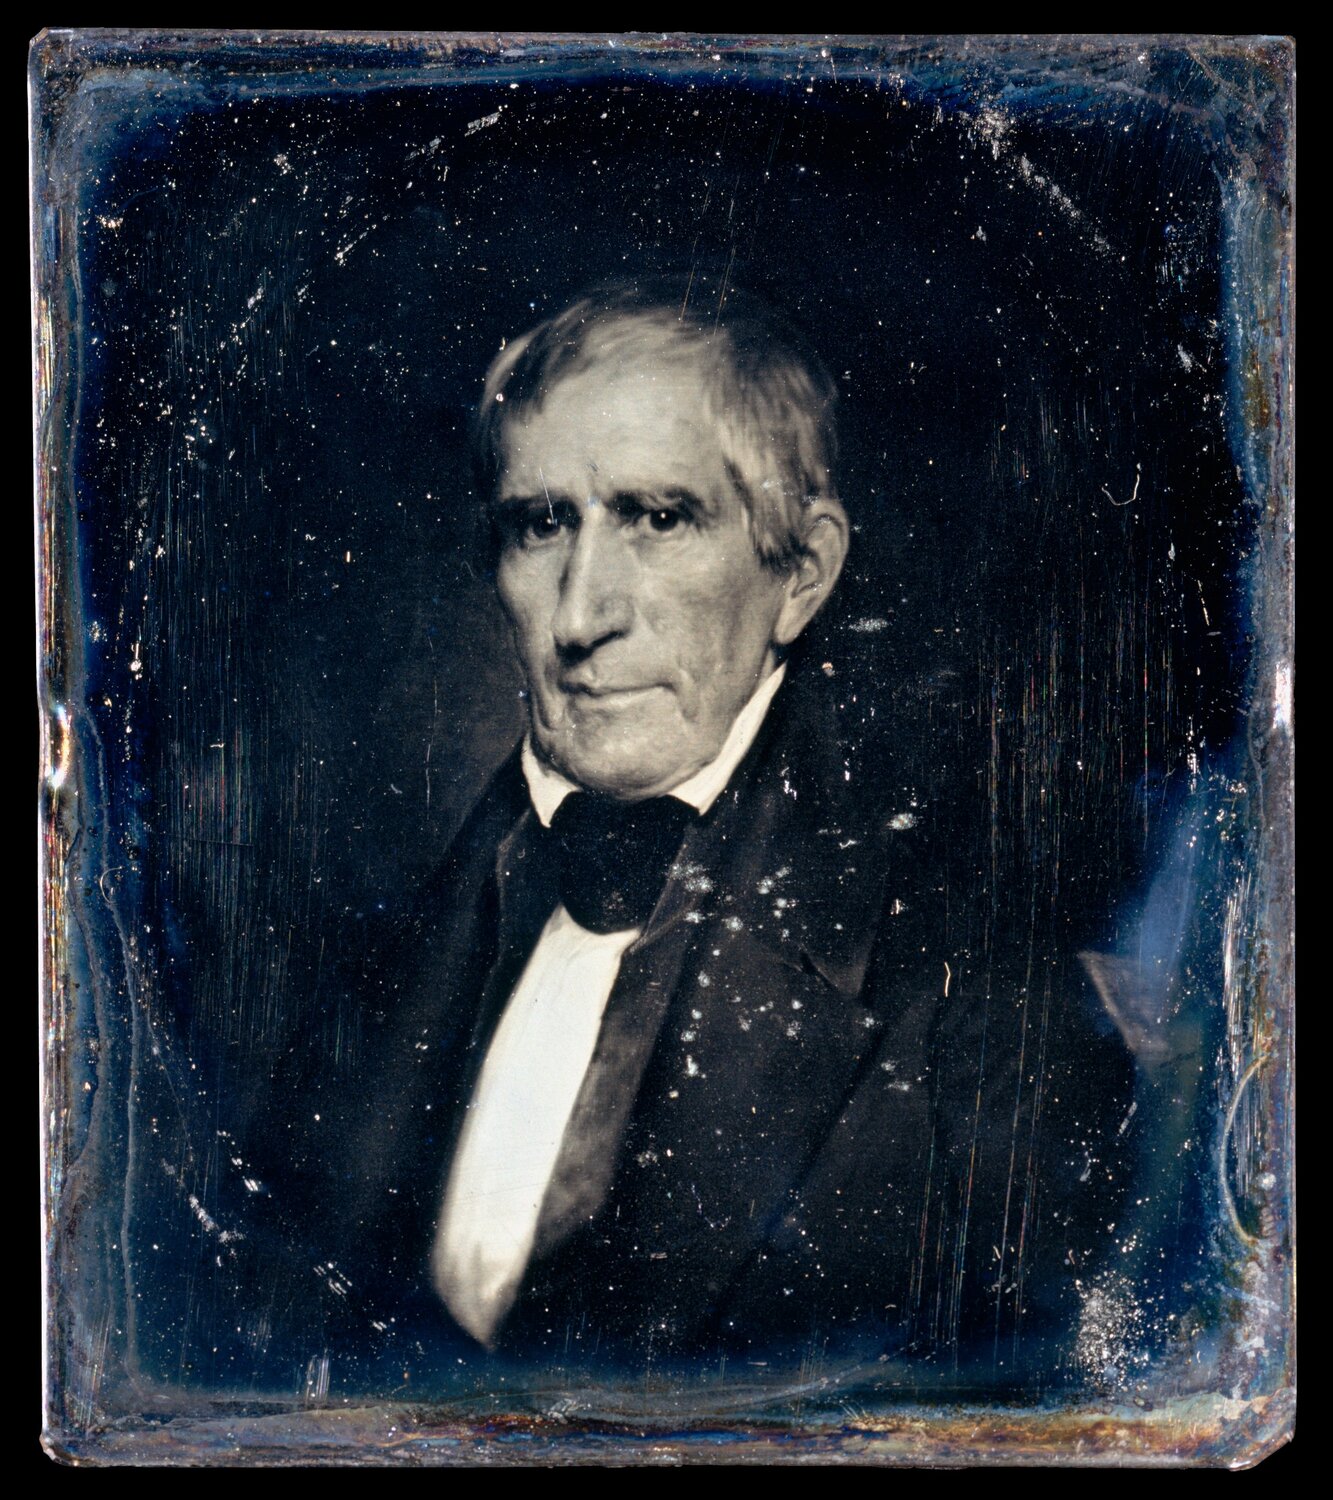 William Henry Harrison, the ninth president of the United States, died 31 days after his inauguration in 1841. He and James Garfield, who was six months in office before he was assassinated in September 1881, are the only two presidents who have never pardoned, rescinded or commuted criminal convictions.